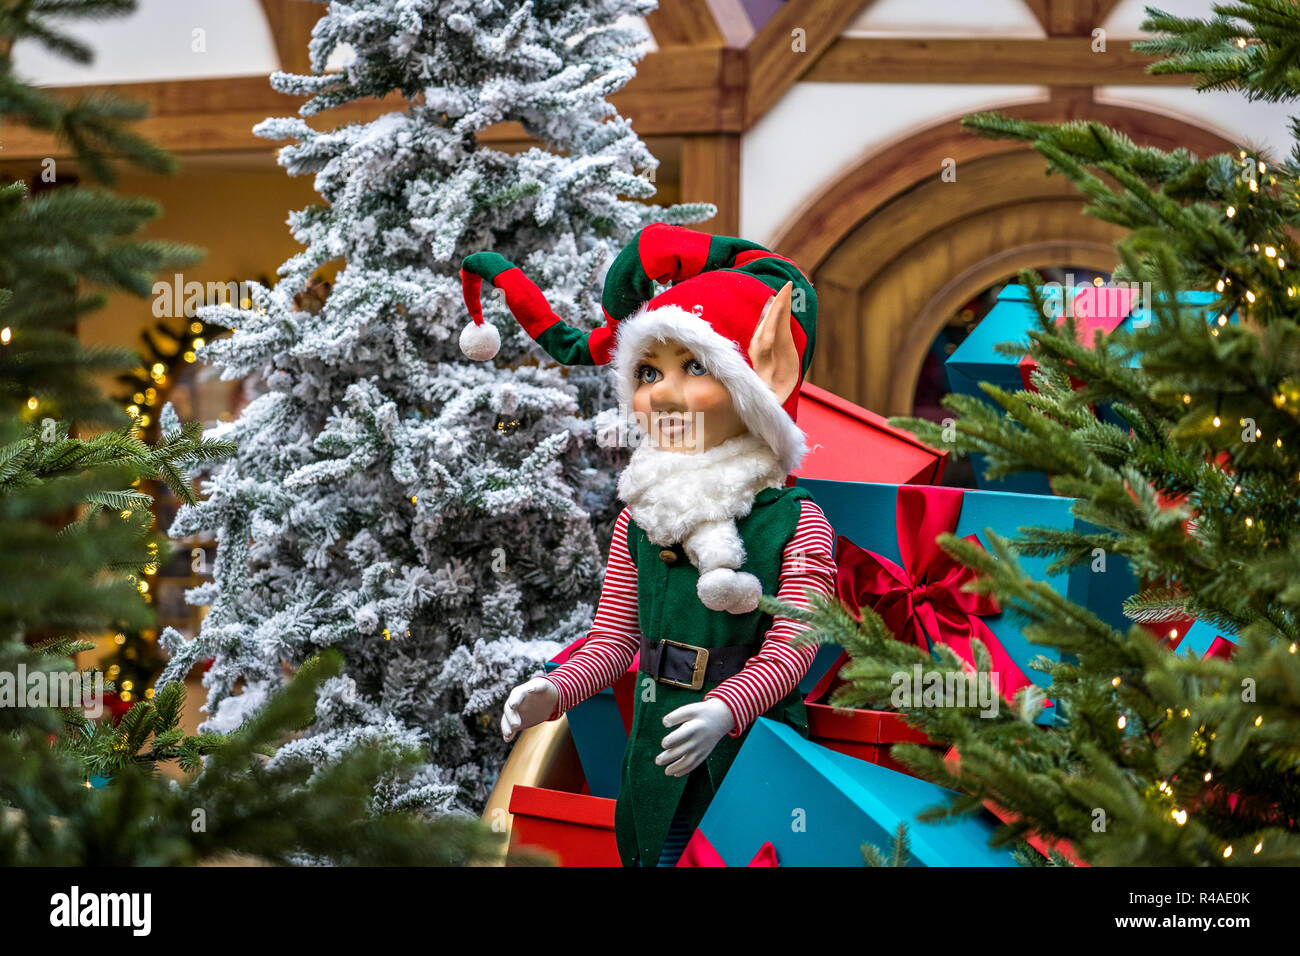 Melbourne Australia Christmas Decorations In Chadstone Shopping Centre Stock Photo Alamy